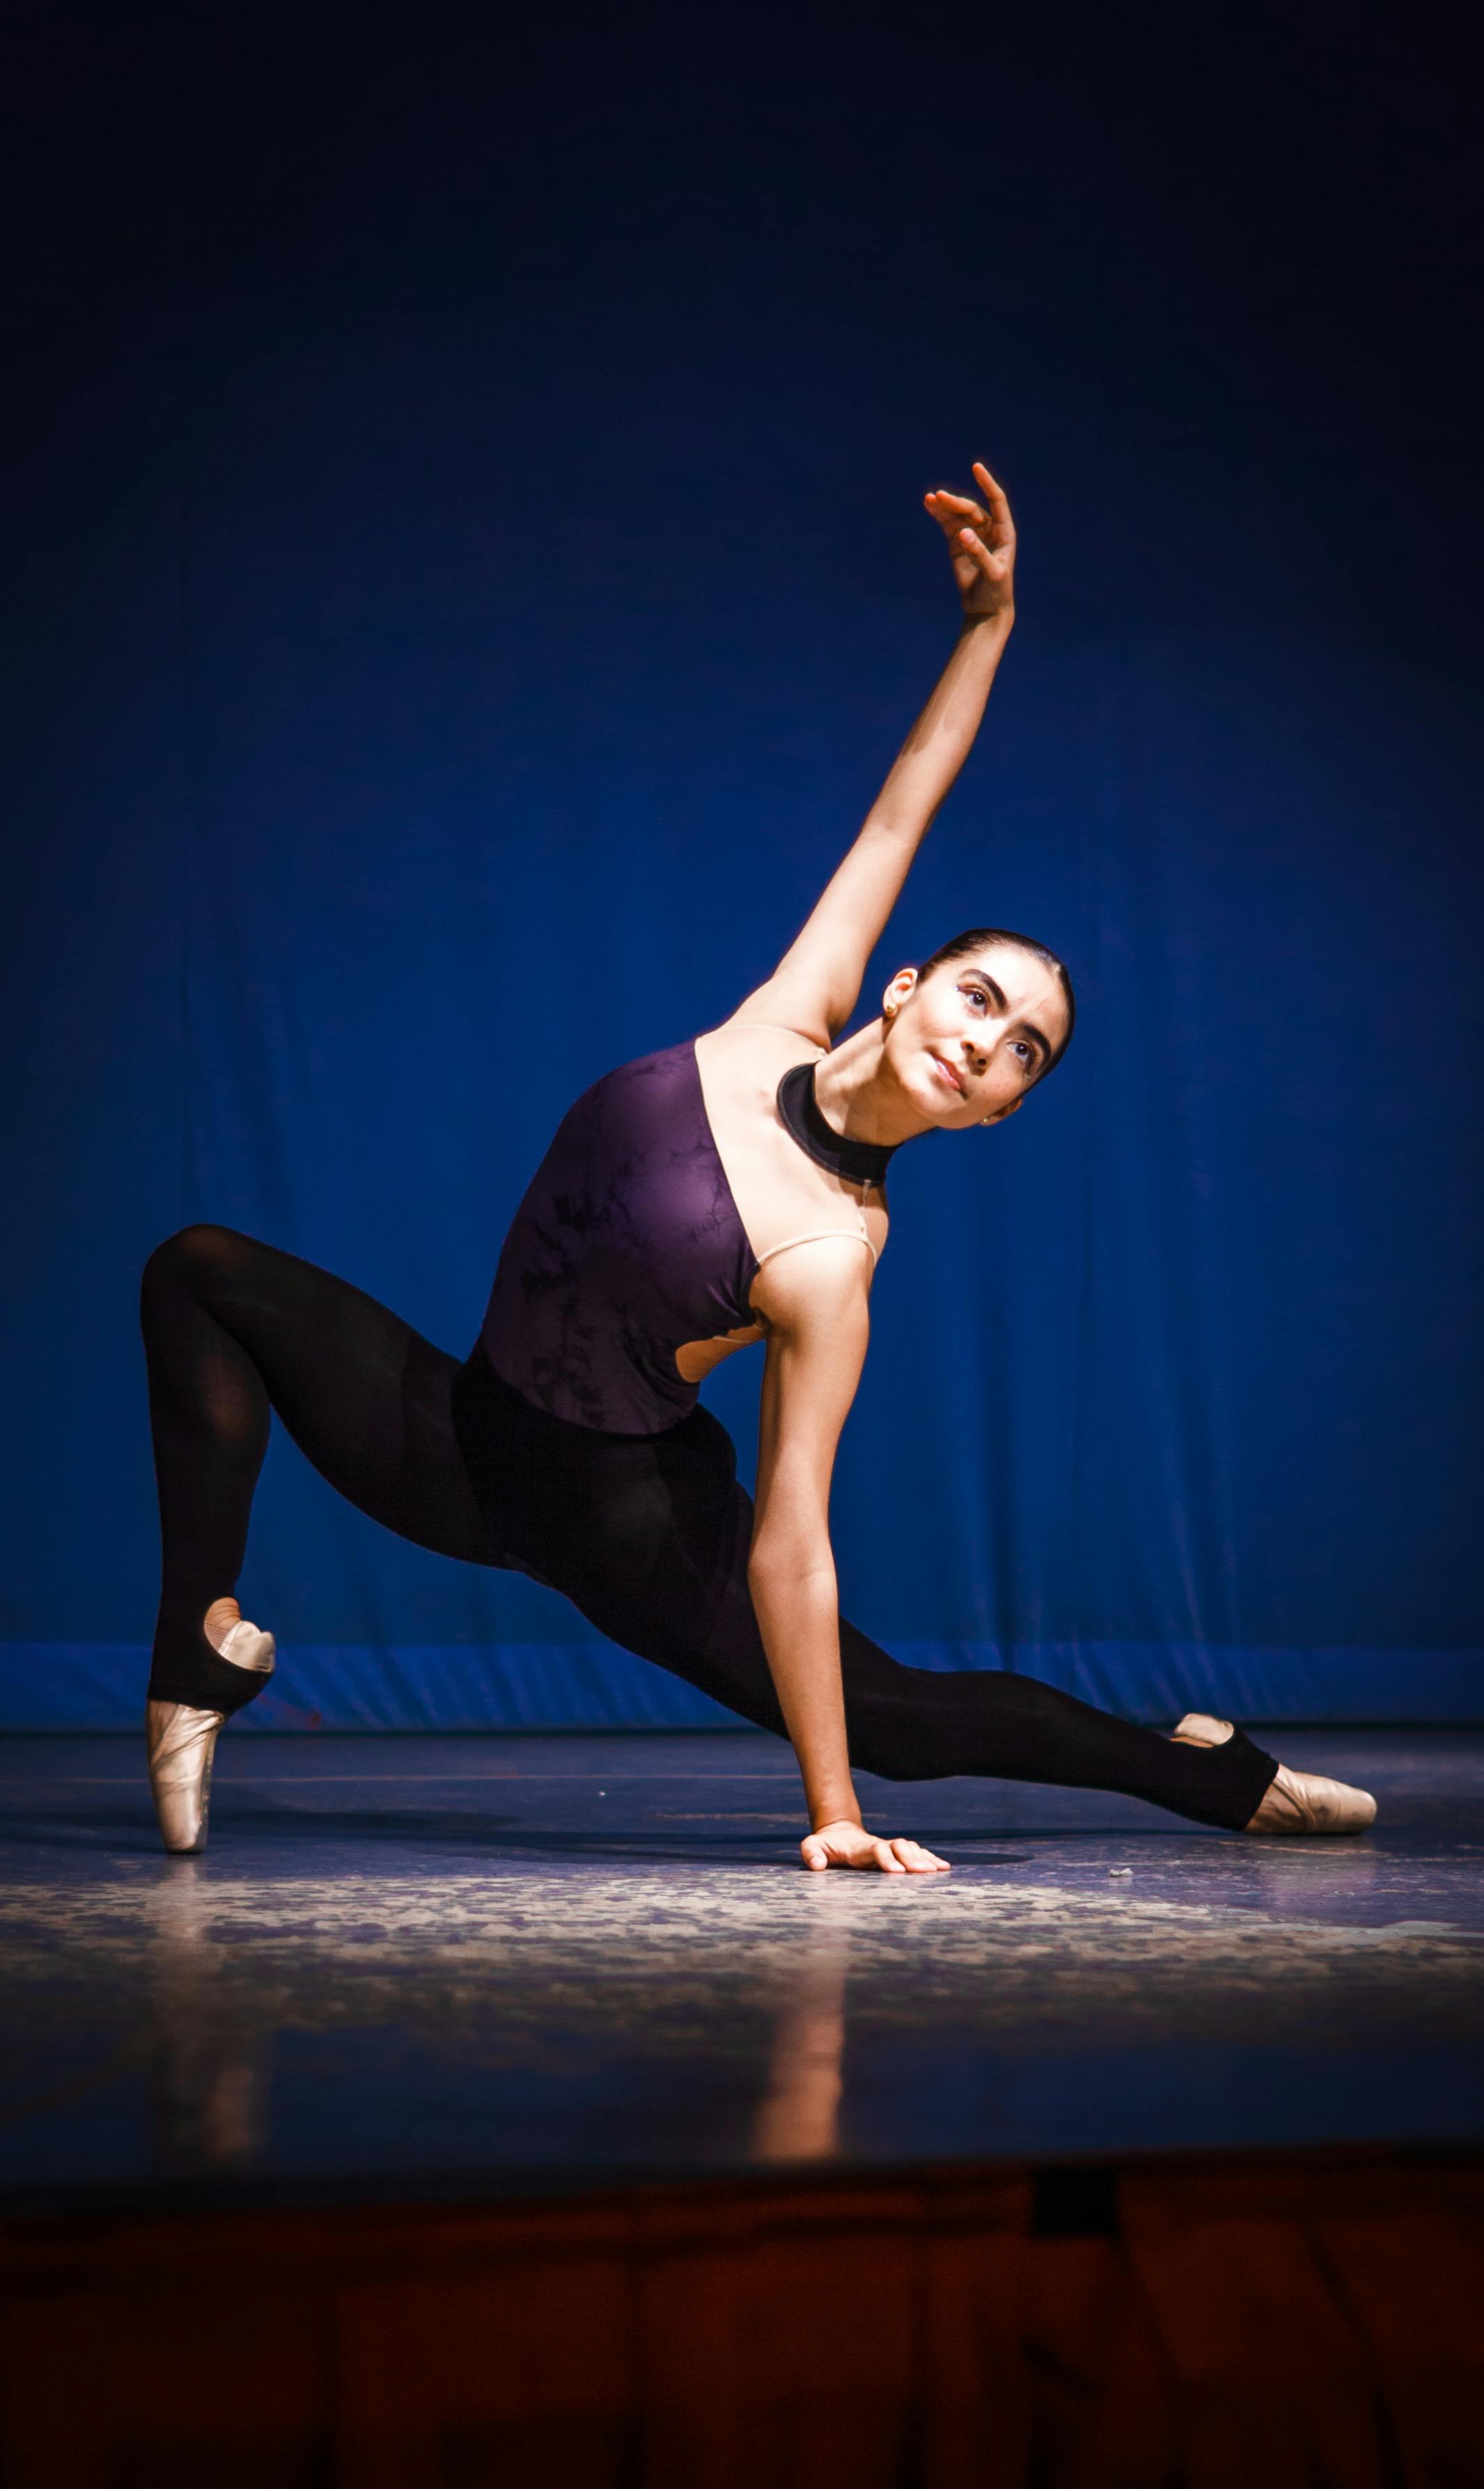 A Preteen Ballerina In Different Dance Poses